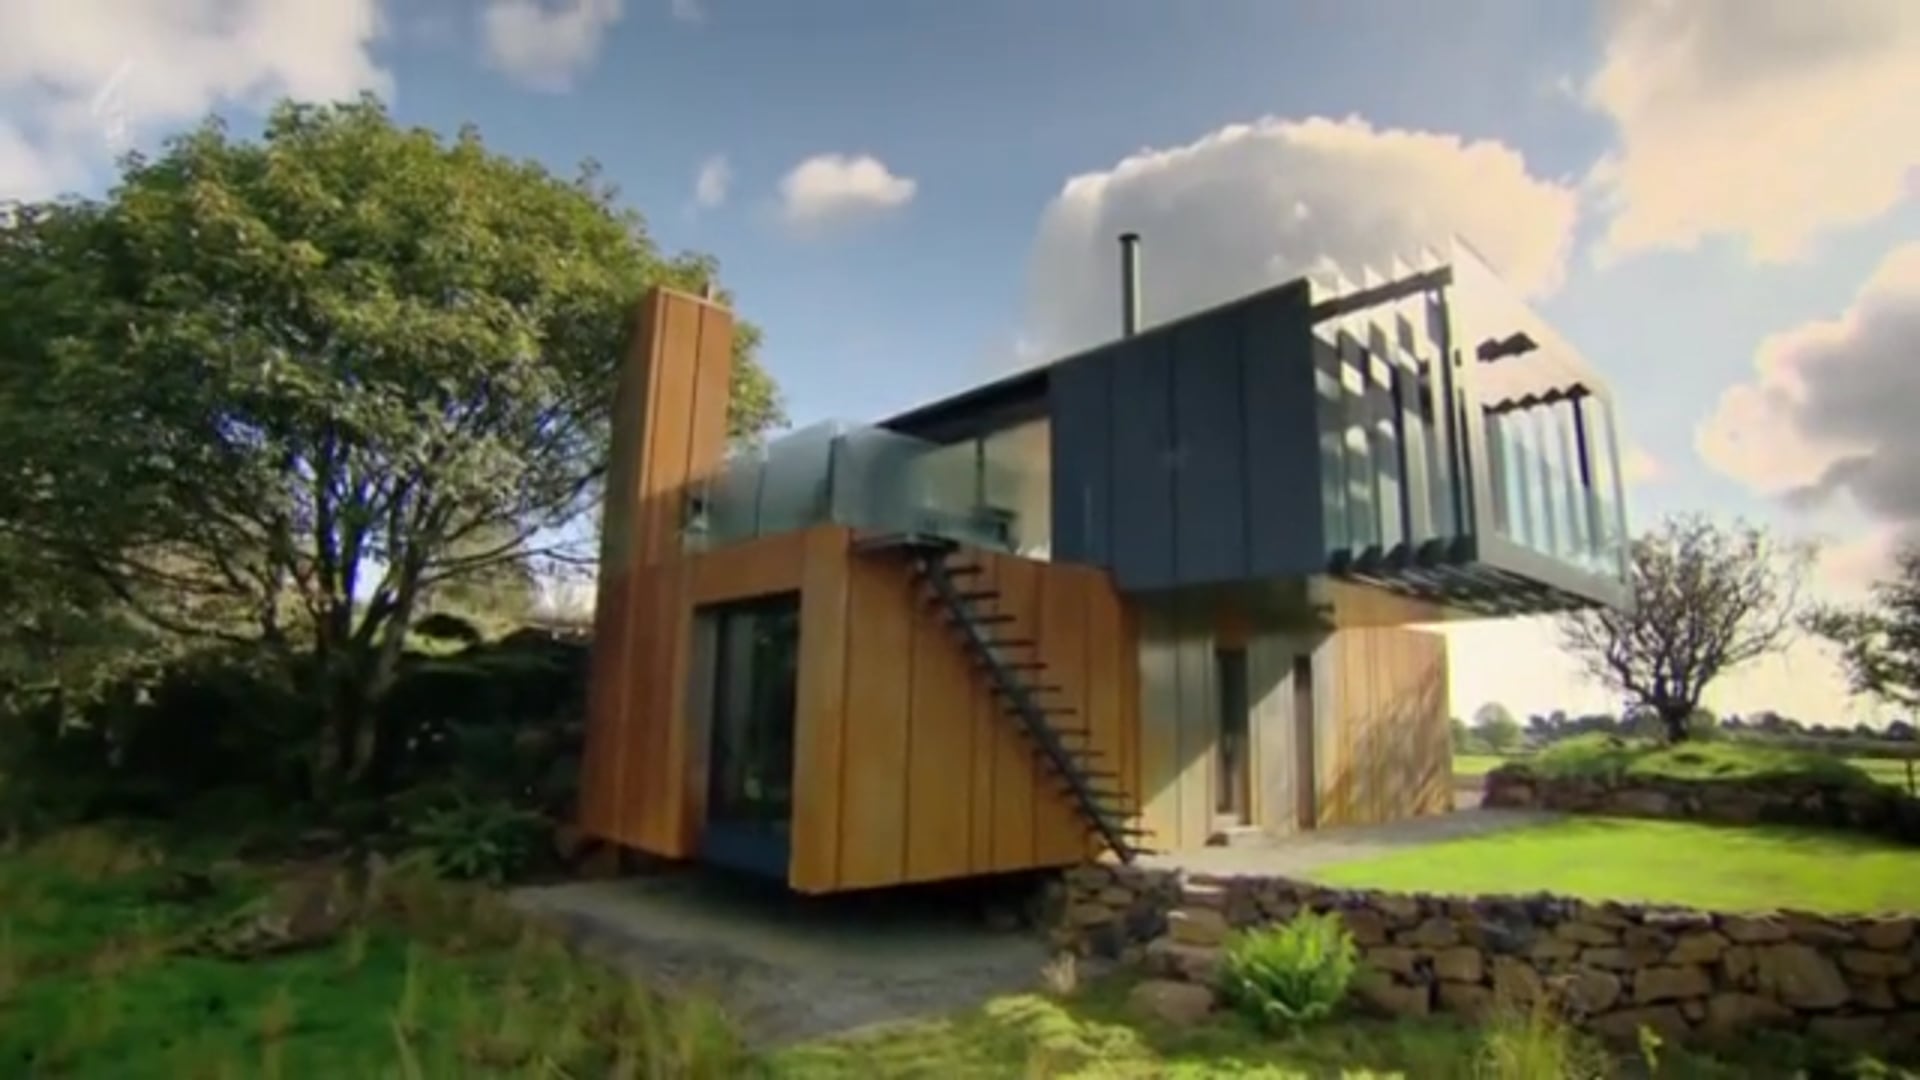 Grand Designs - Shipping Container House